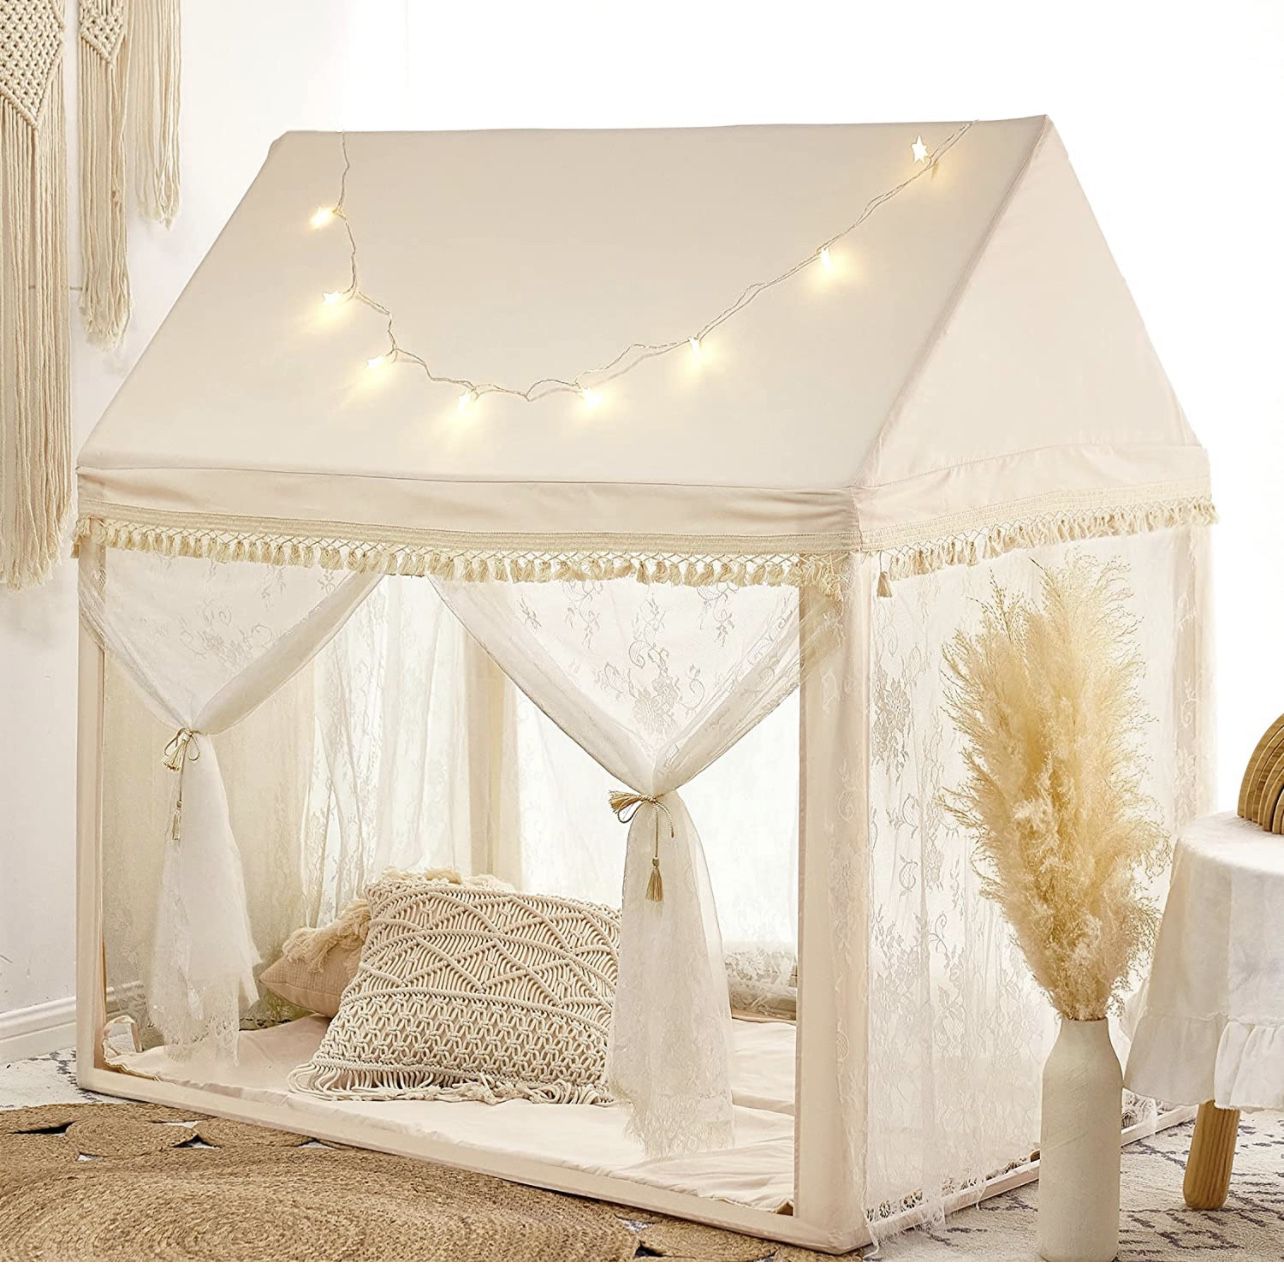  Kids Play Tent Large Playhouse with Mat/Star Light/Star Garland/Tassel Macrame Boho Style Indoor&Outdoor Play Tent for Kids, Neutral Color, 52x35x52